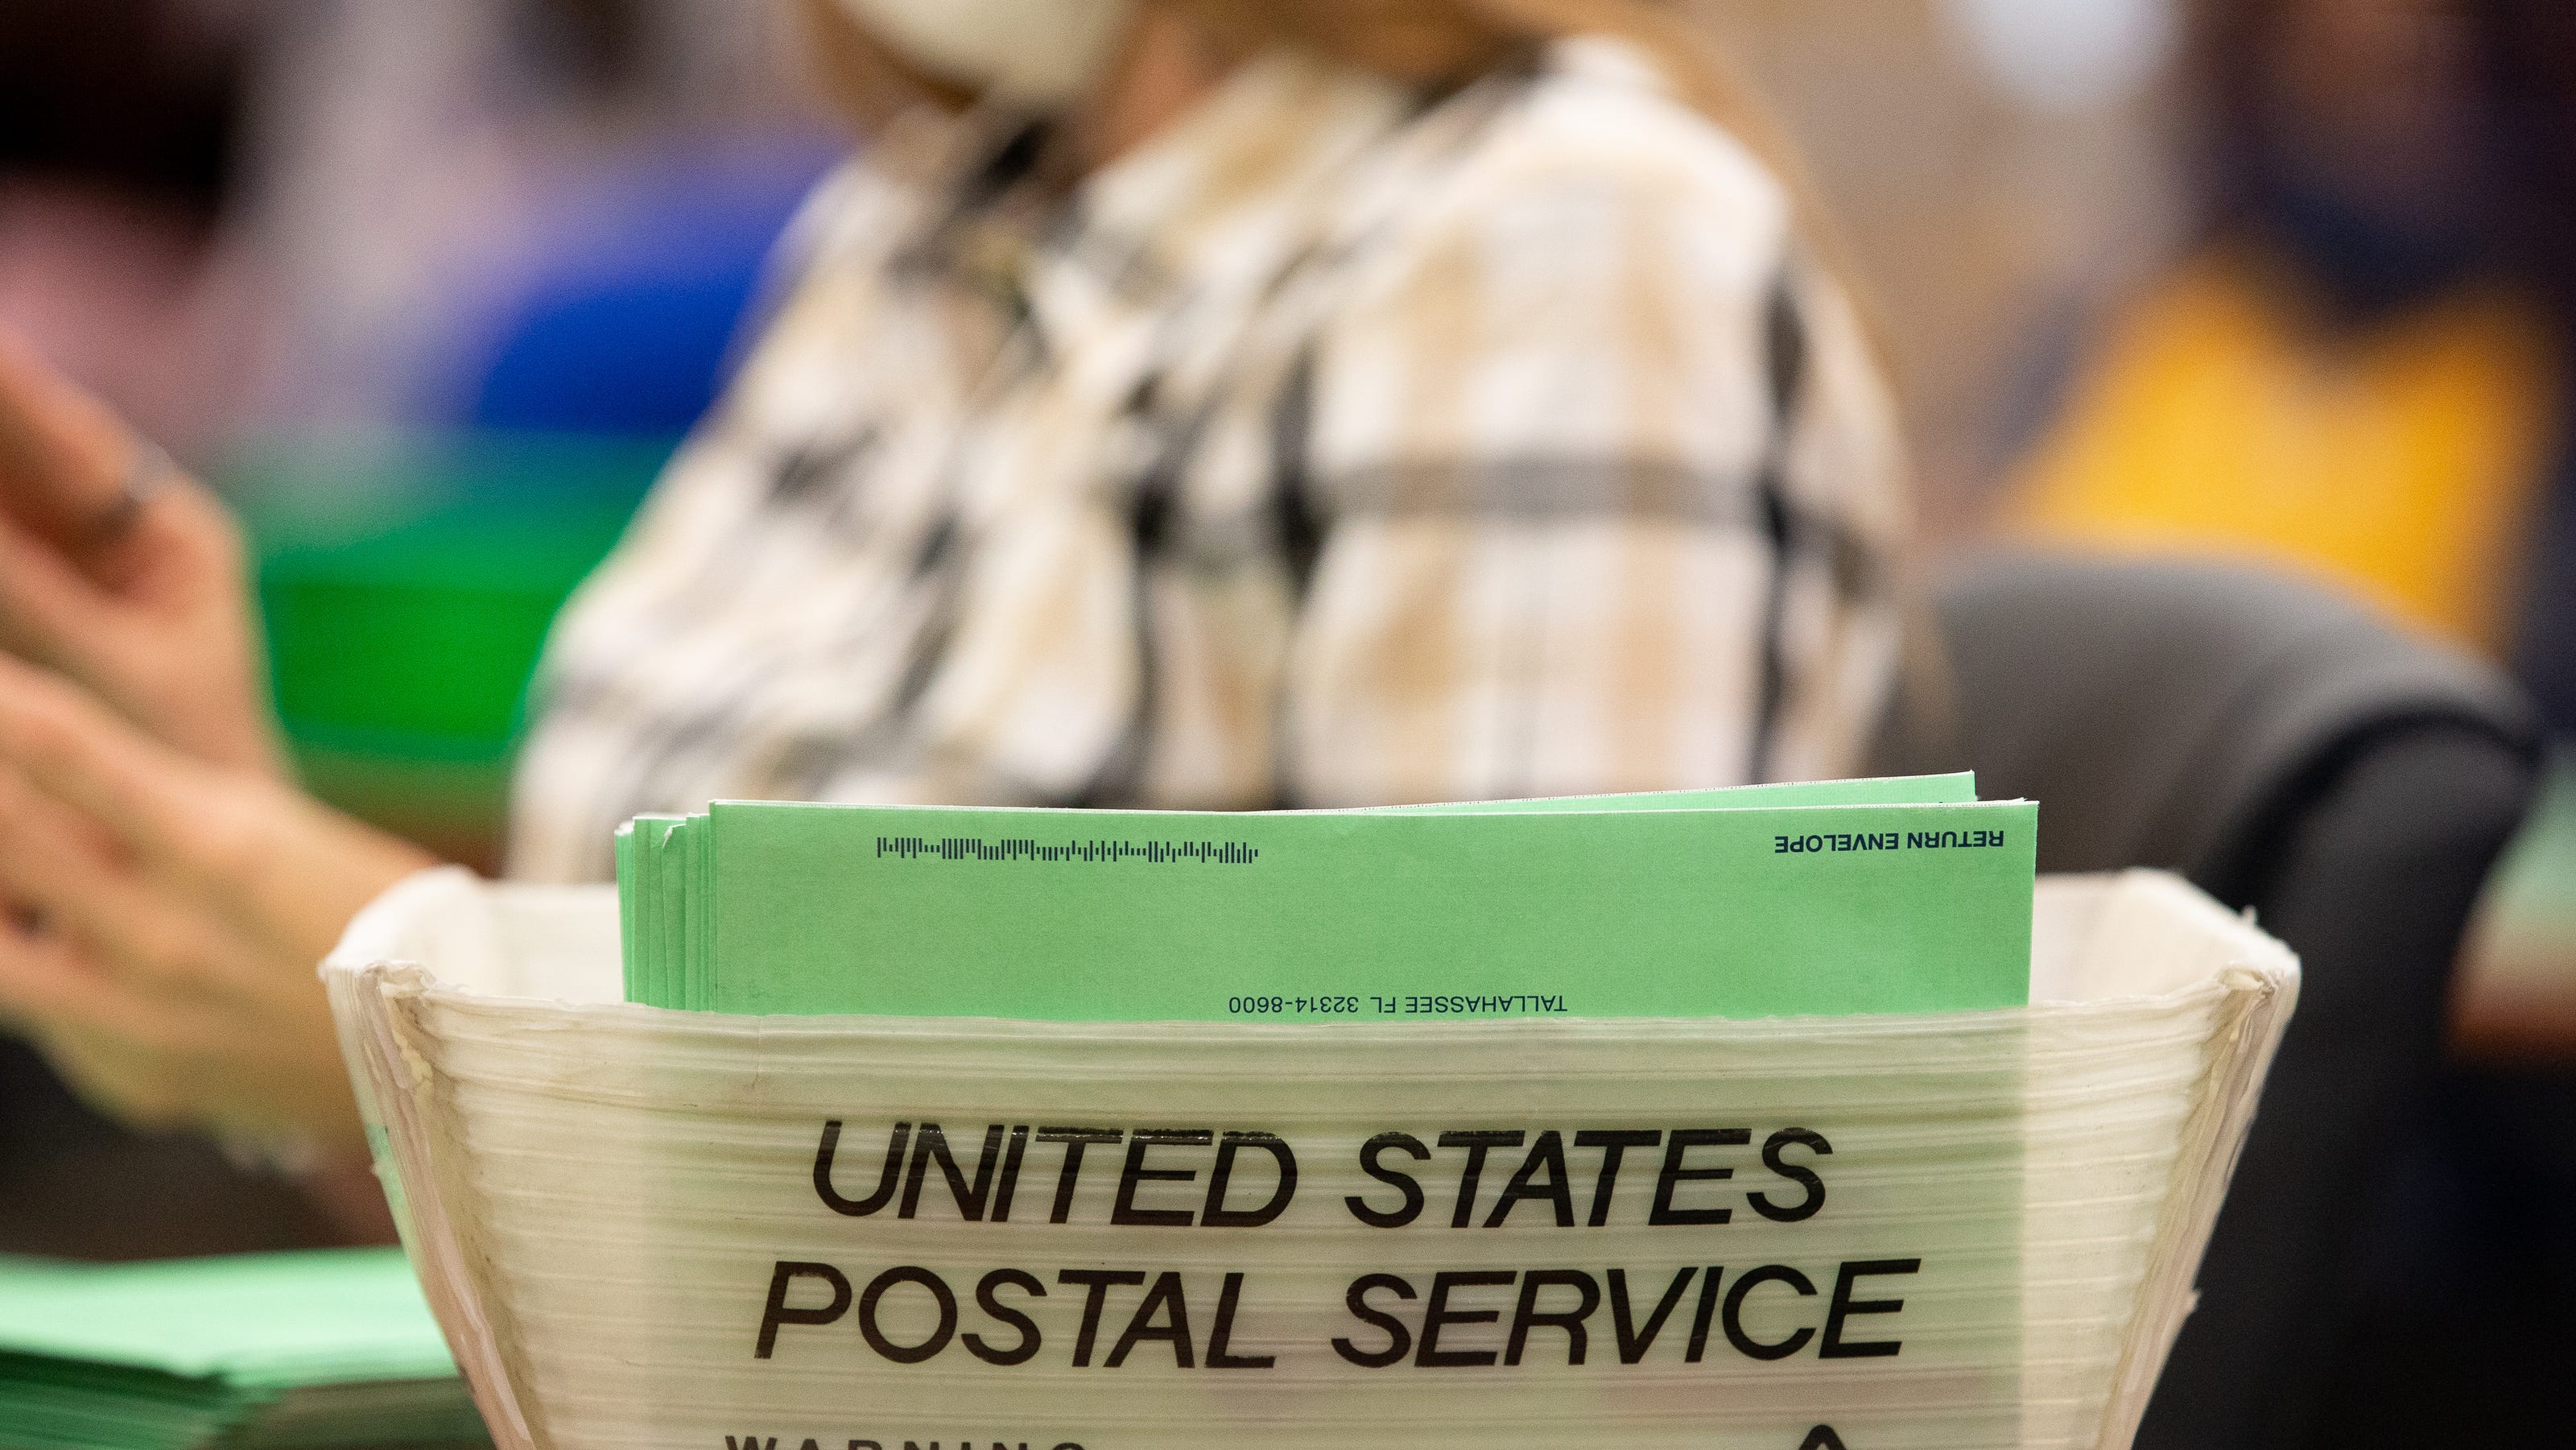 Advocates say it's too late to mail ballots to arrive by deadline